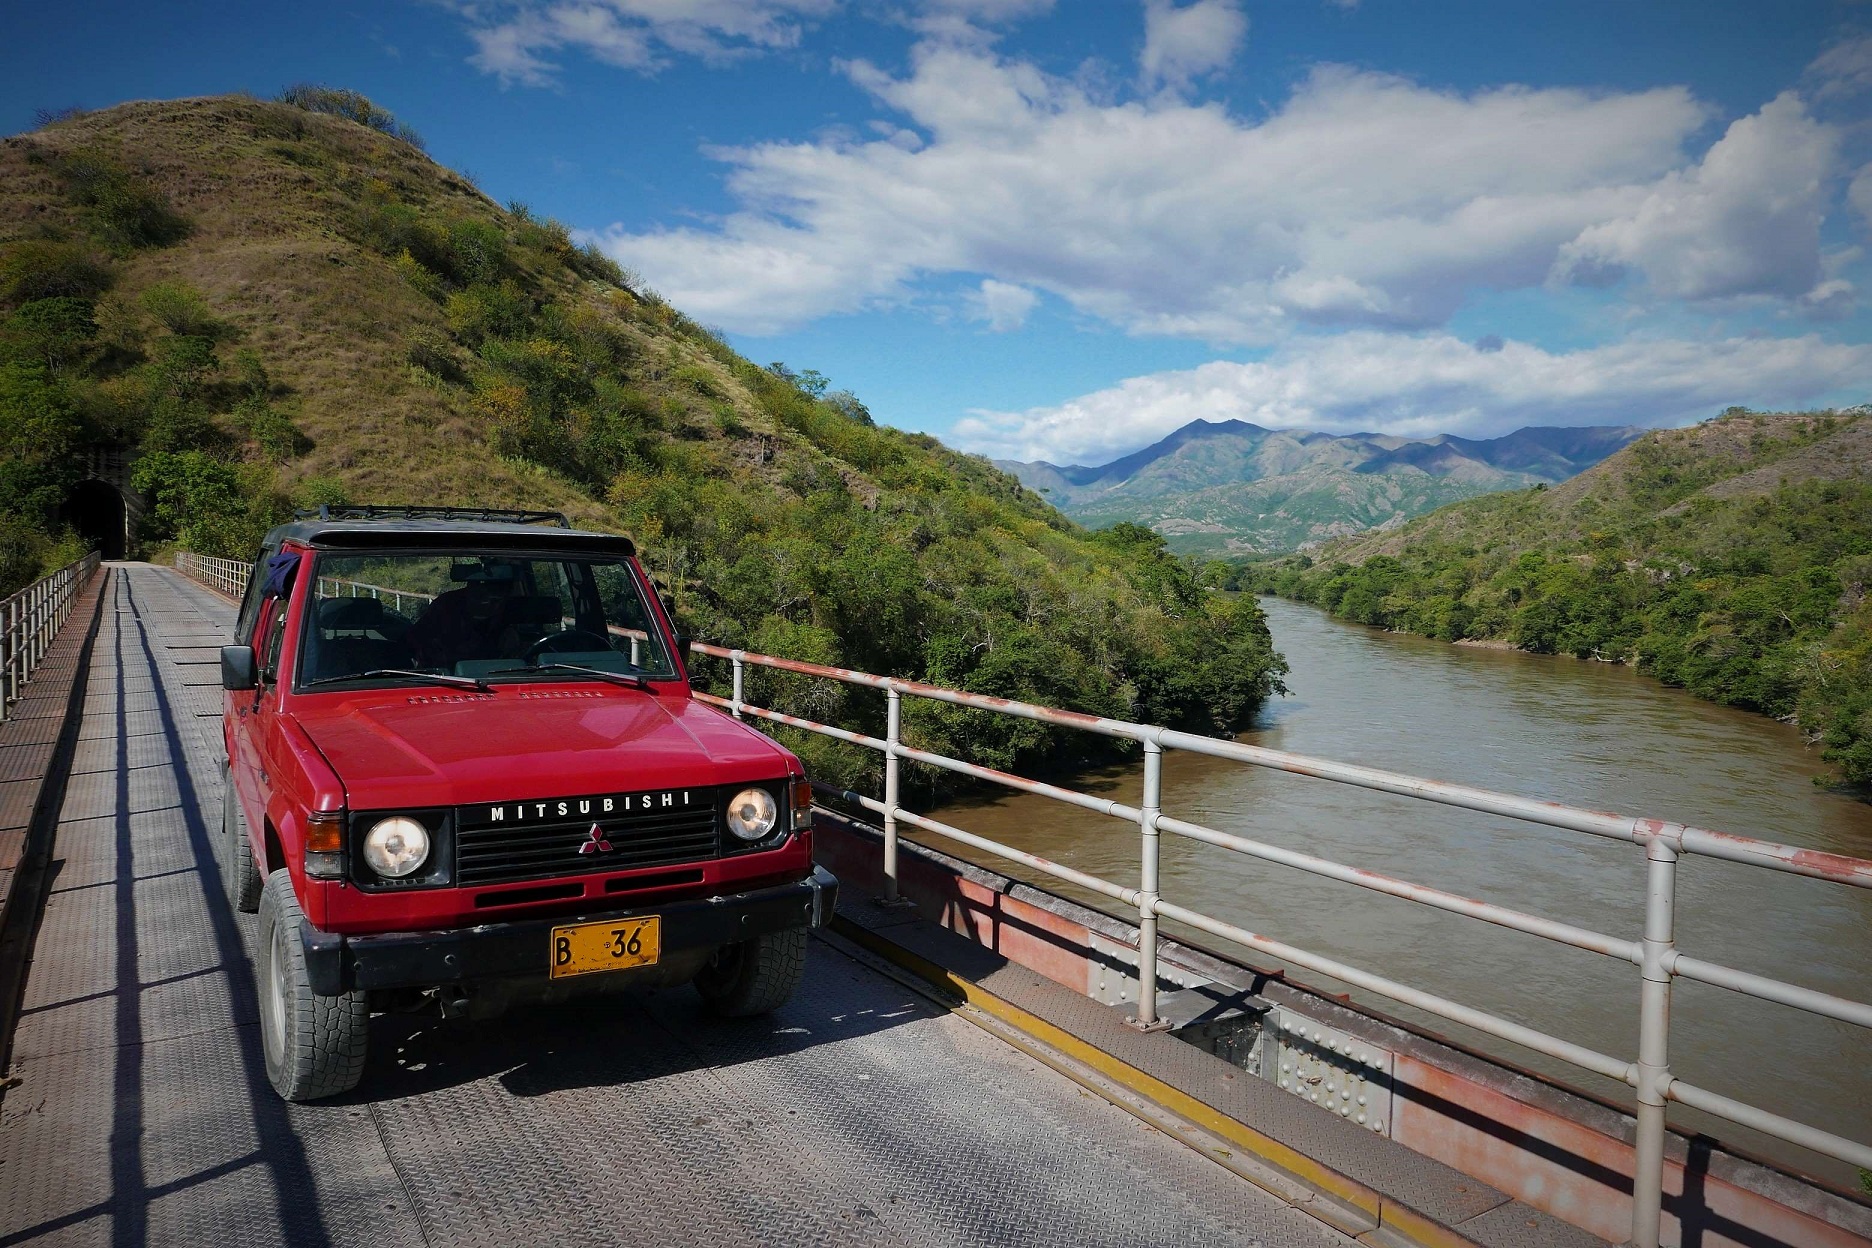 rossing the Rio Magdalena over the old Golondrinas railway bridge in Huila, Colombia.